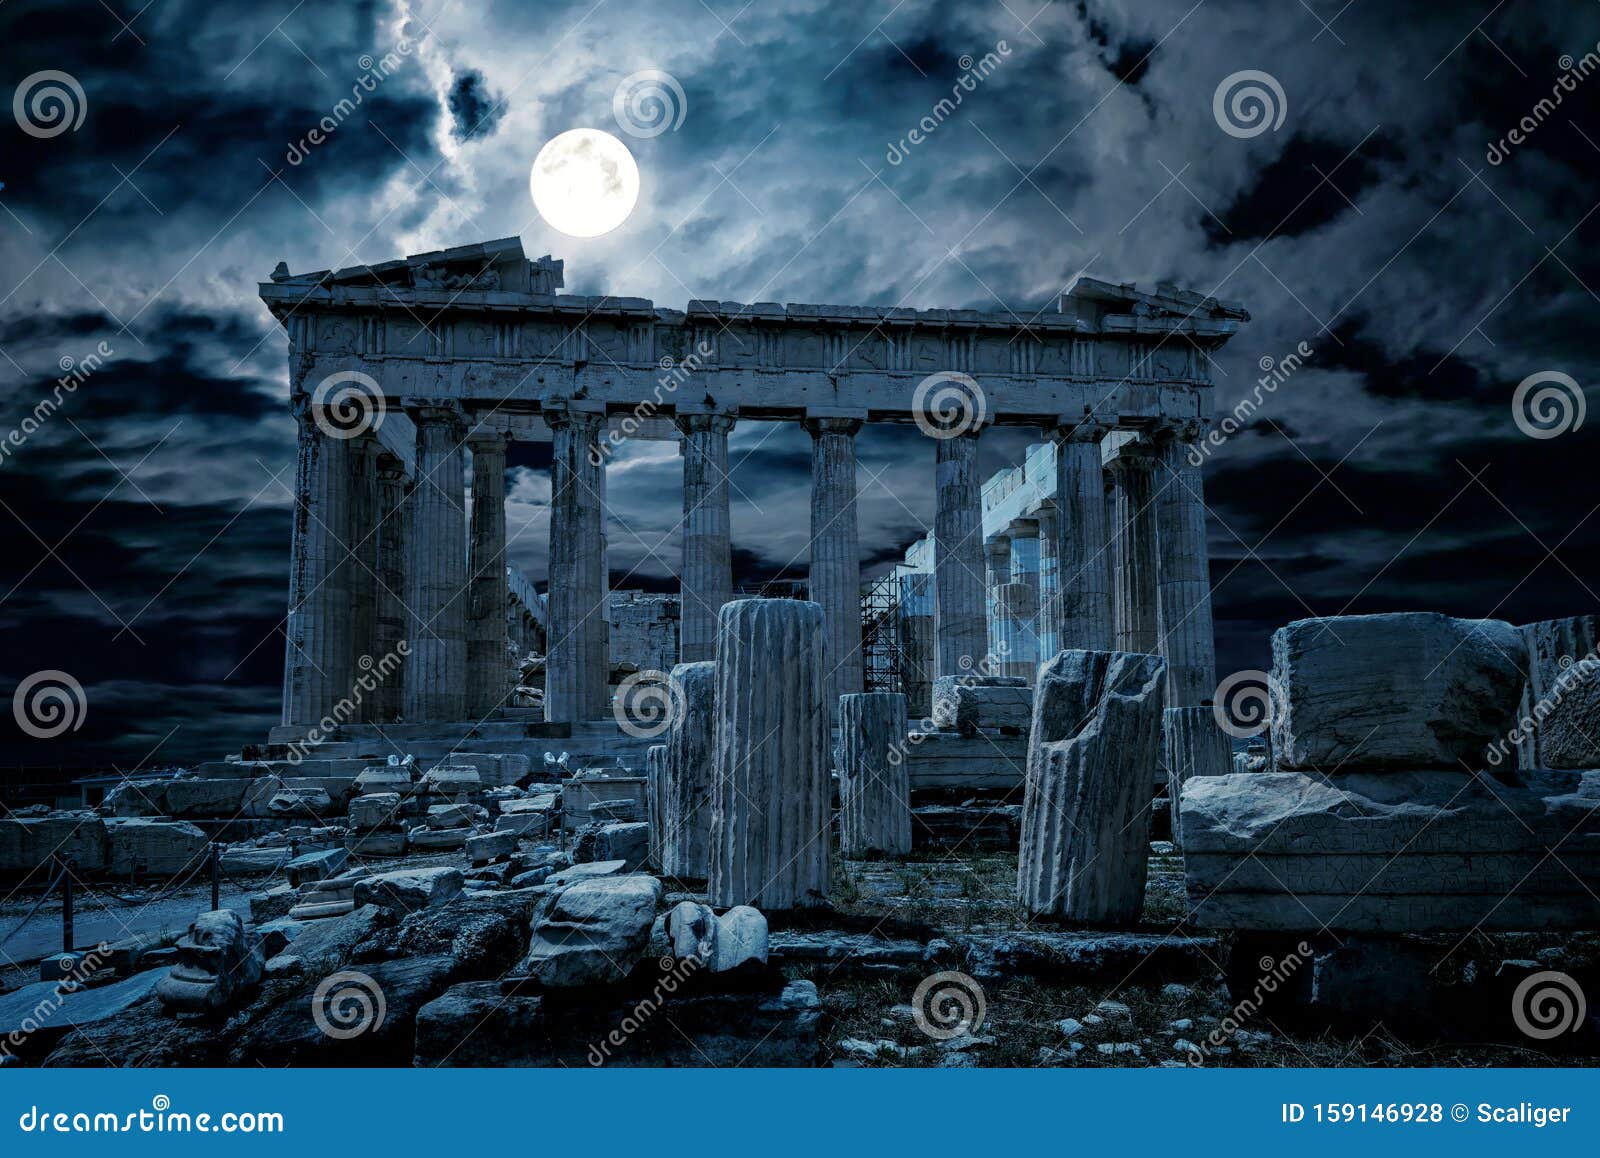 athens at night, greece. fantasy view of old mysterious parthenon temple, top landmark of athens city